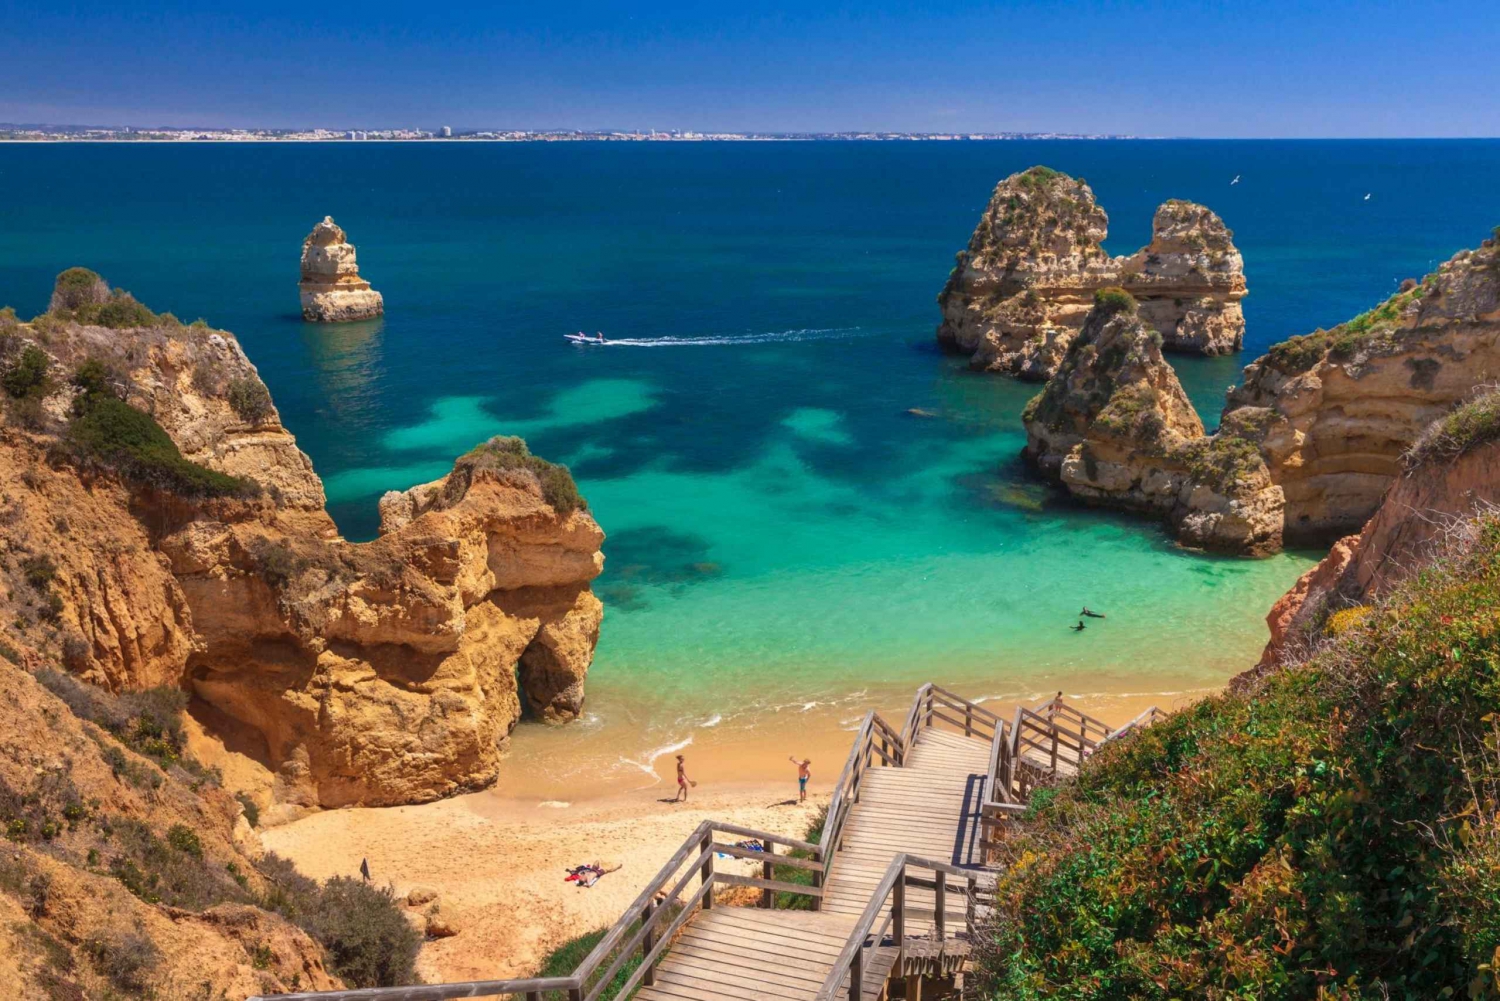 Algarve Full Day Tour Private- Vip Tour, boat tour included